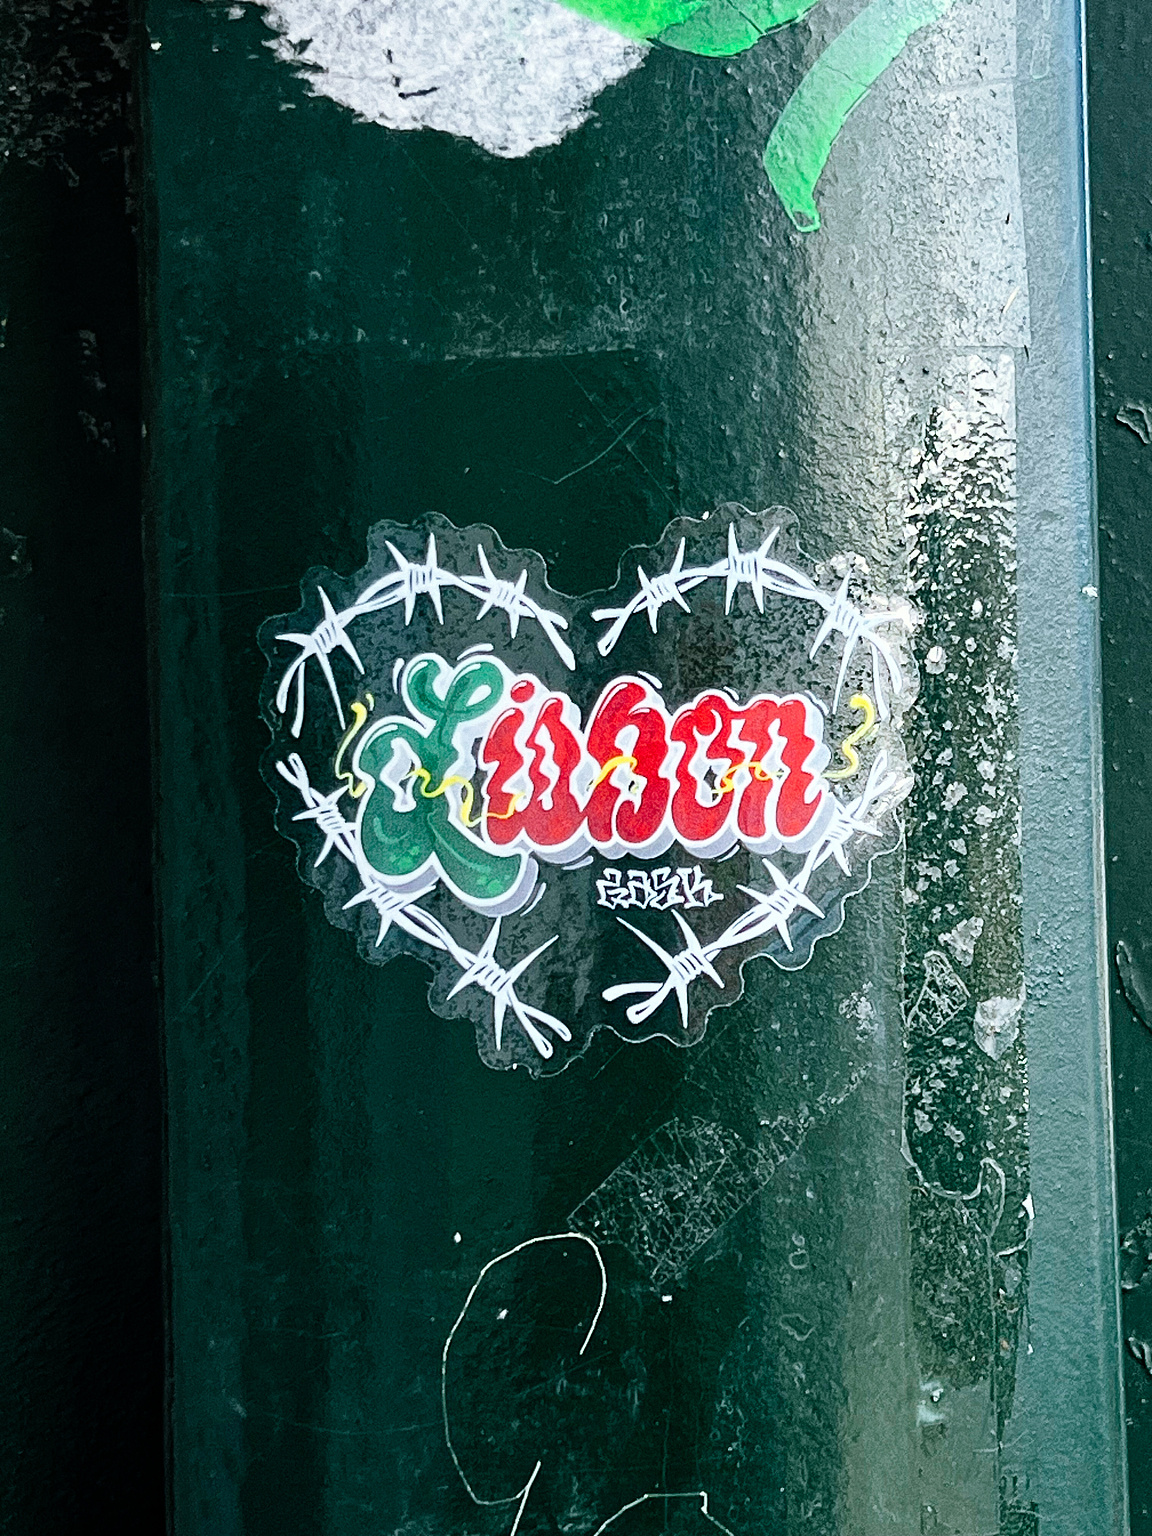 A sticker depicting a stylized heart shaped by barbed wire, with "Lisbon" written in graffiti style, is adhered to a weathered metal surface.